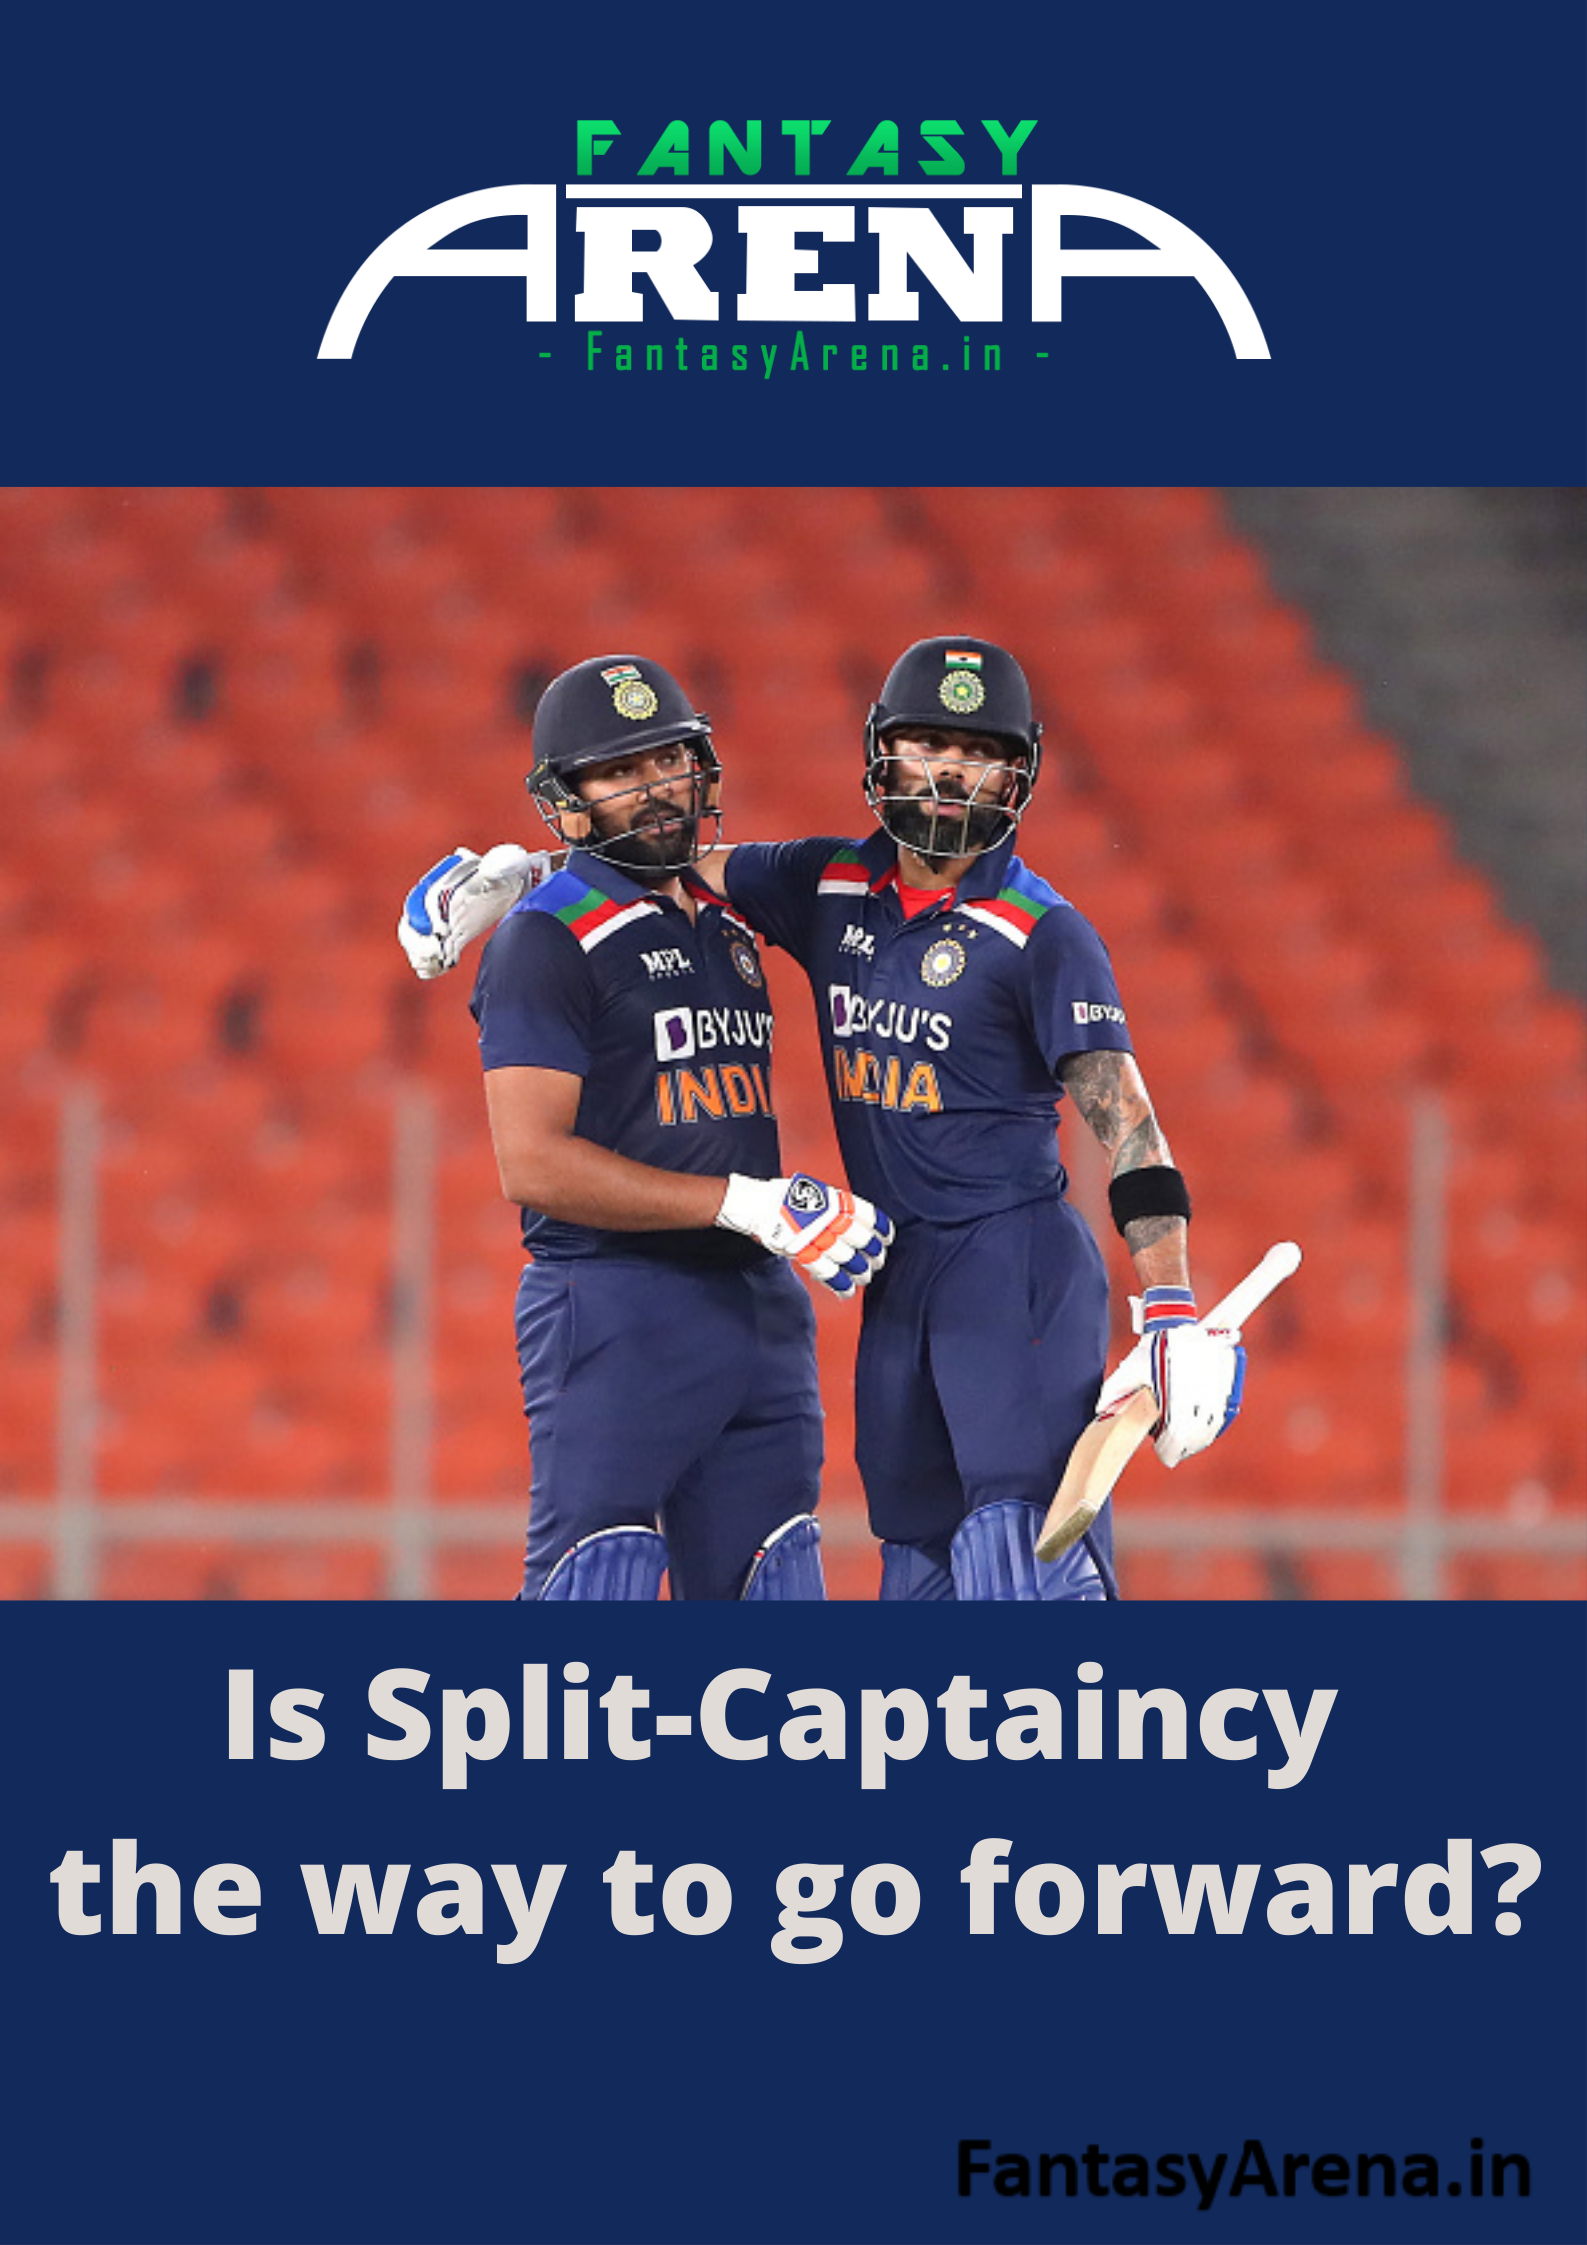 Is Indian Cricket ready for Split Captaincy?